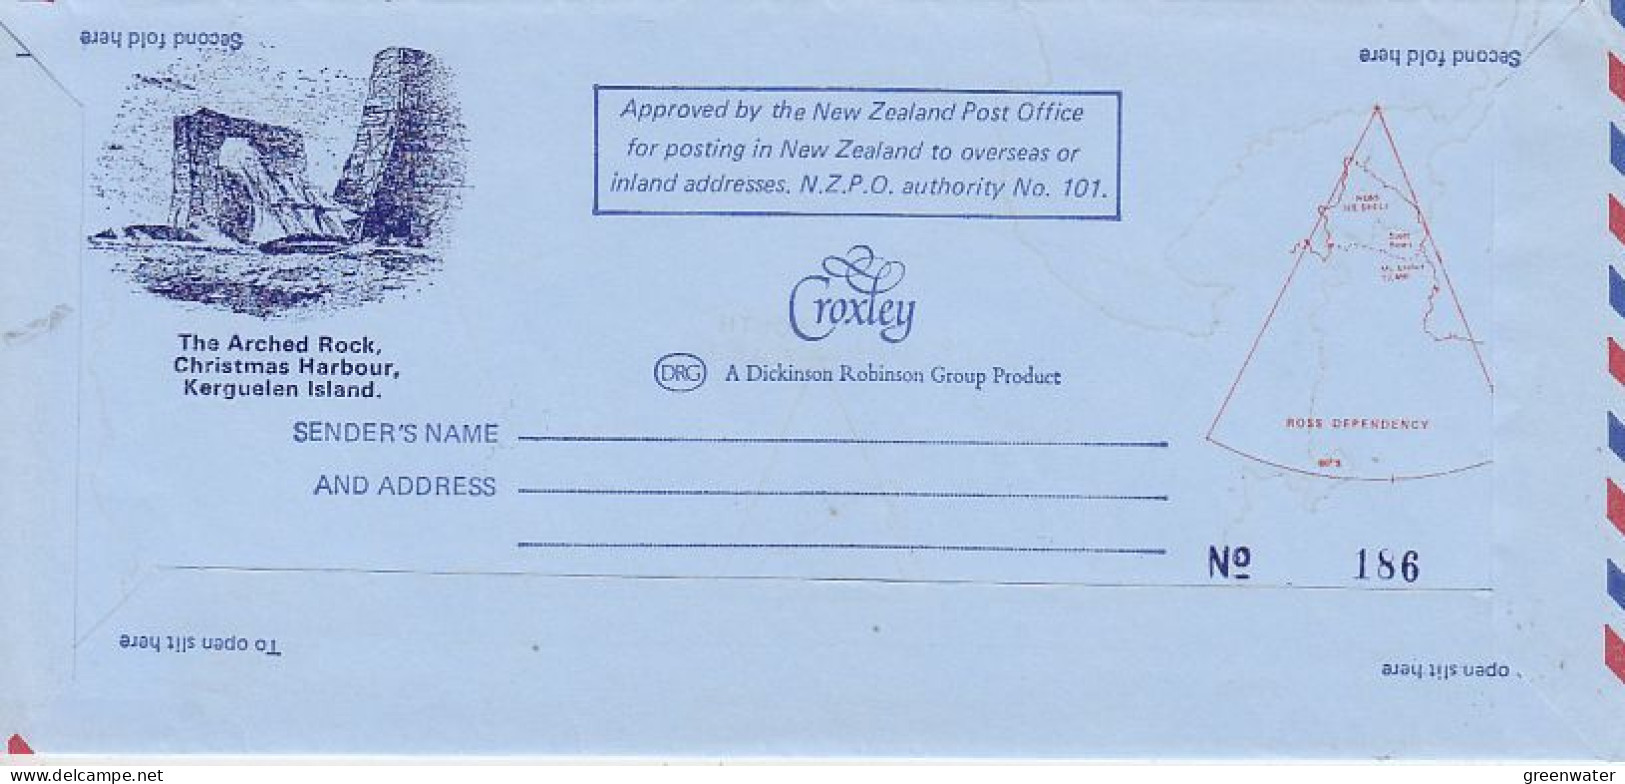 Ross Dependency 1841-1981 140th Ann. Of The Discovery Of Mt. Ross Aerogramme Unused (RO192) - Storia Postale